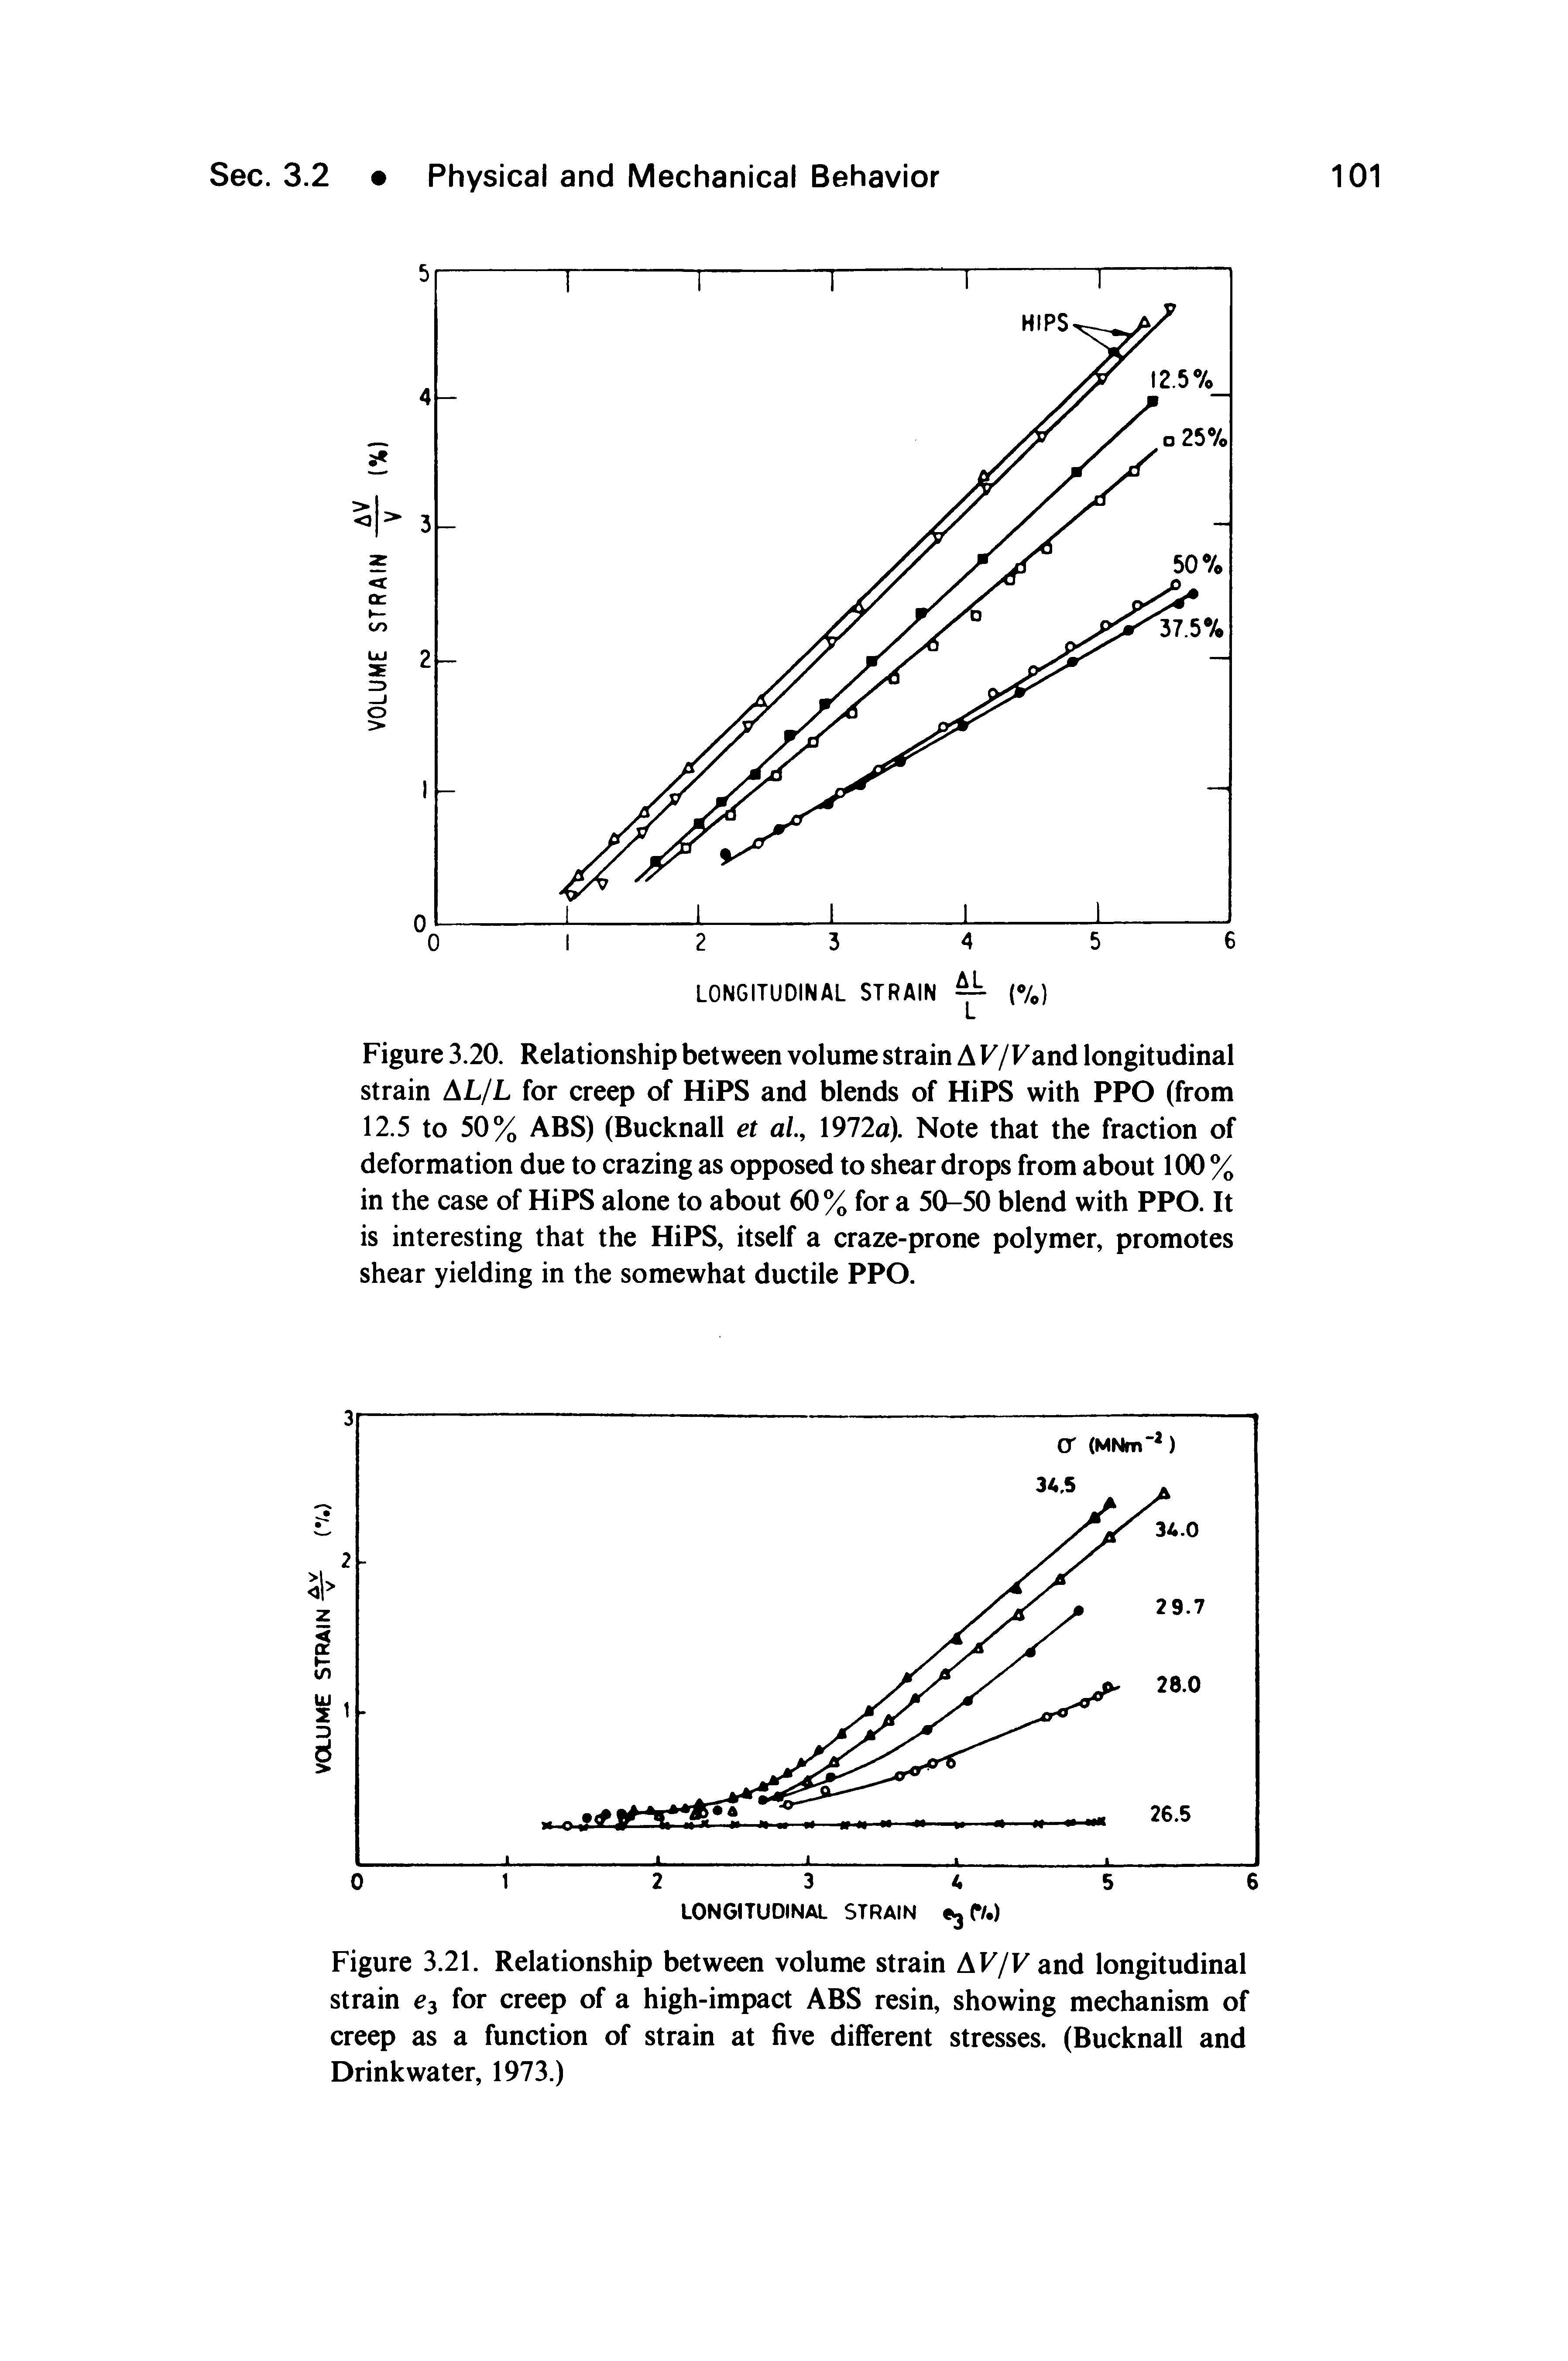 Figure 3.21. Relationship between volume strain AF/F and longitudinal strain for creep of a high-impact ABS resin, showing mechanism of creep as a function of strain at five different stresses. (Bucknall and Drink water, 1973.)...